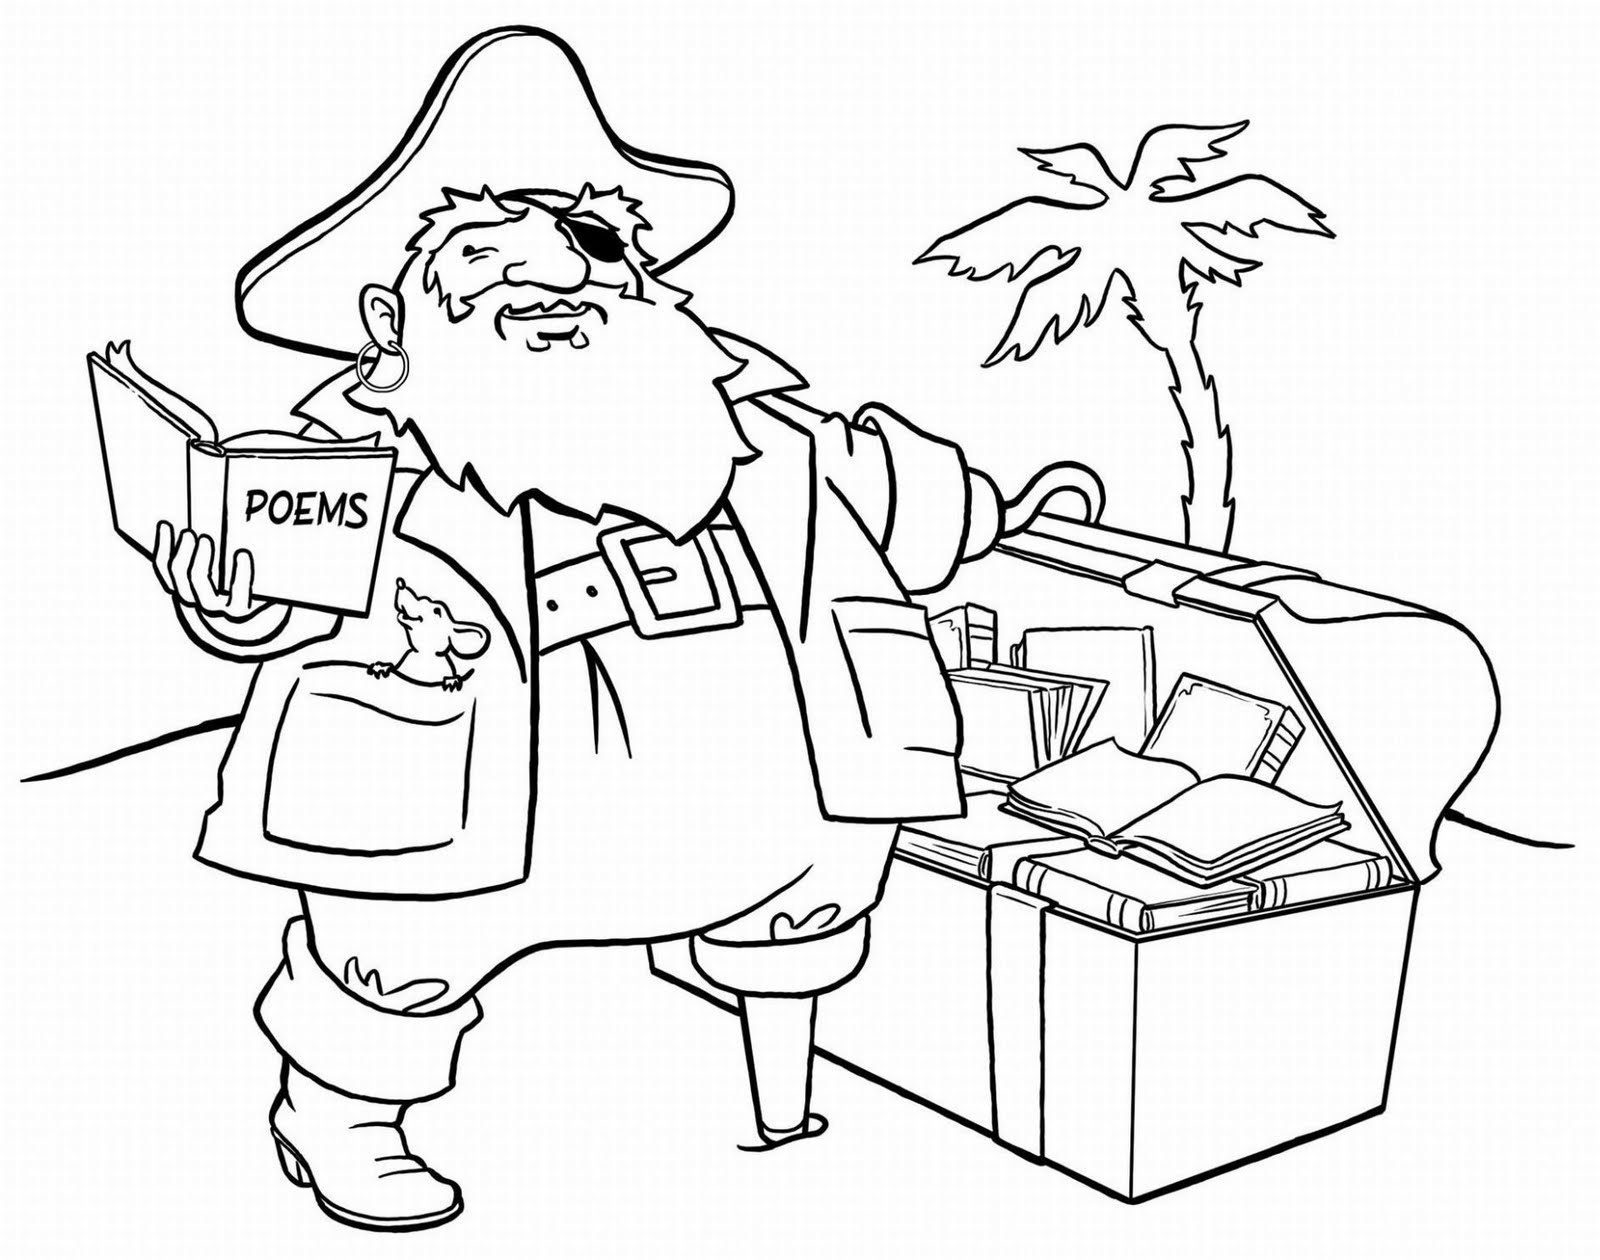 Pirate Finds The Treasure coloring page